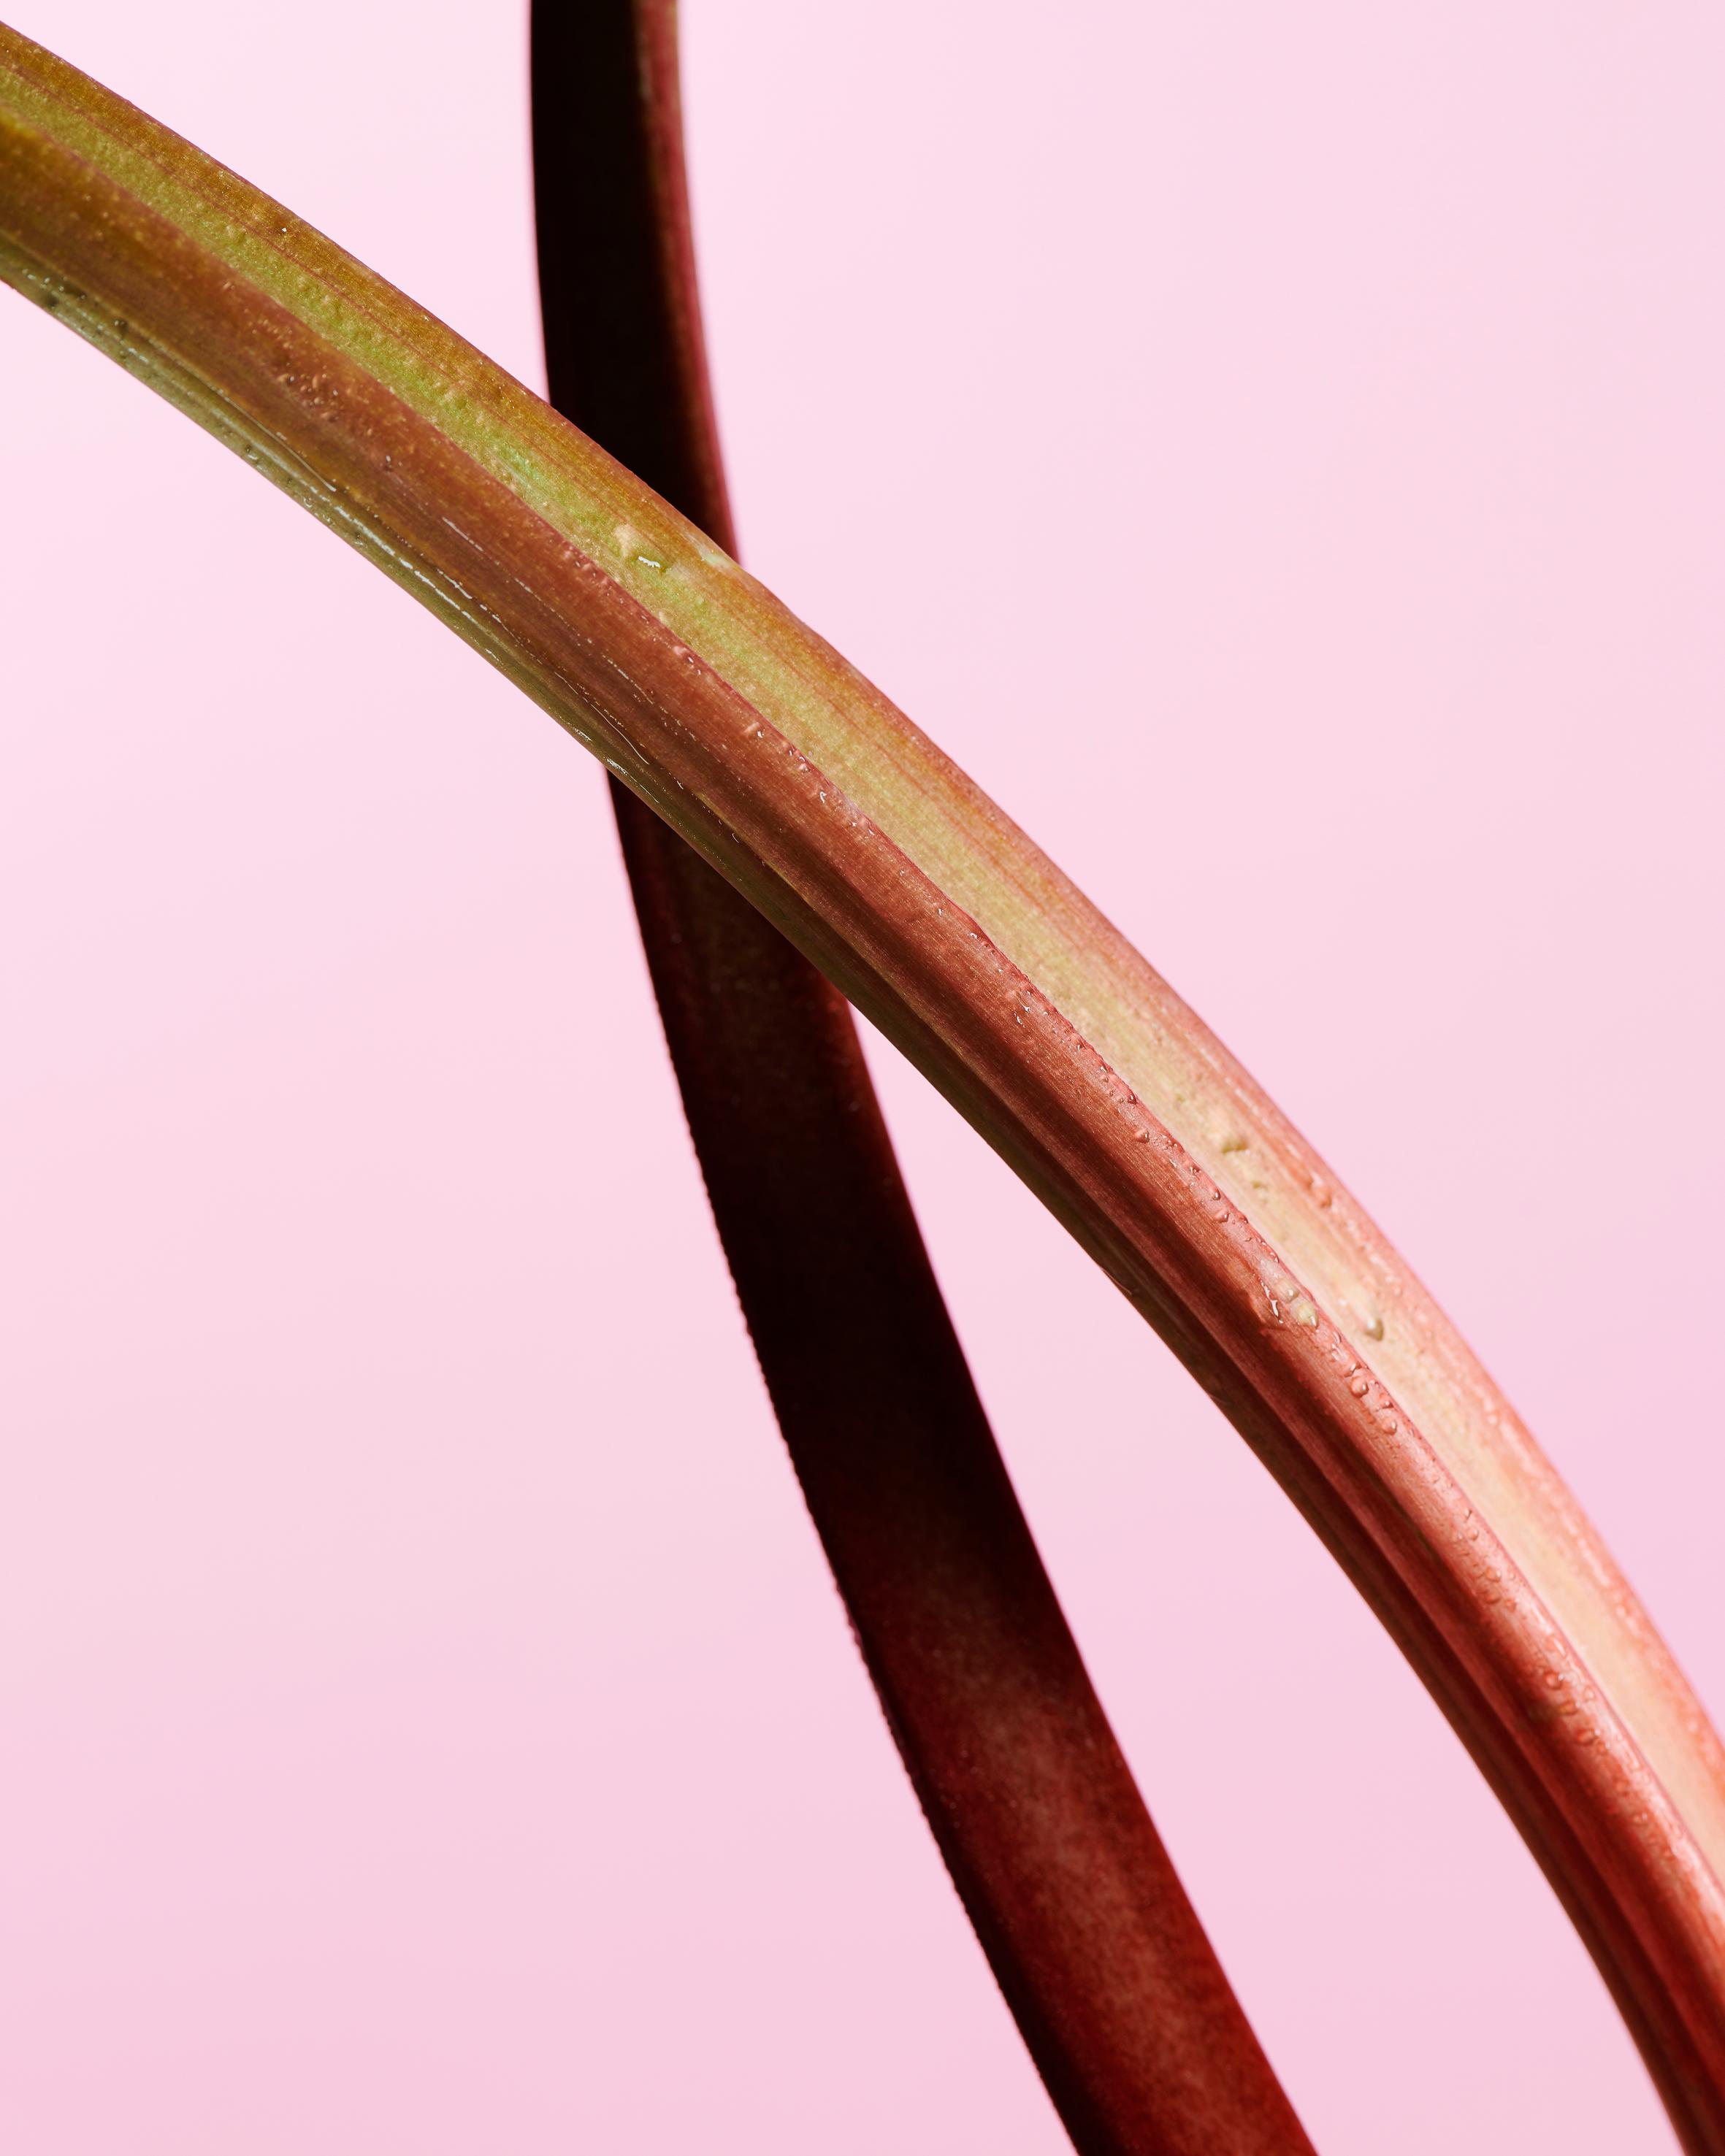 Rhubarb on top of pink background